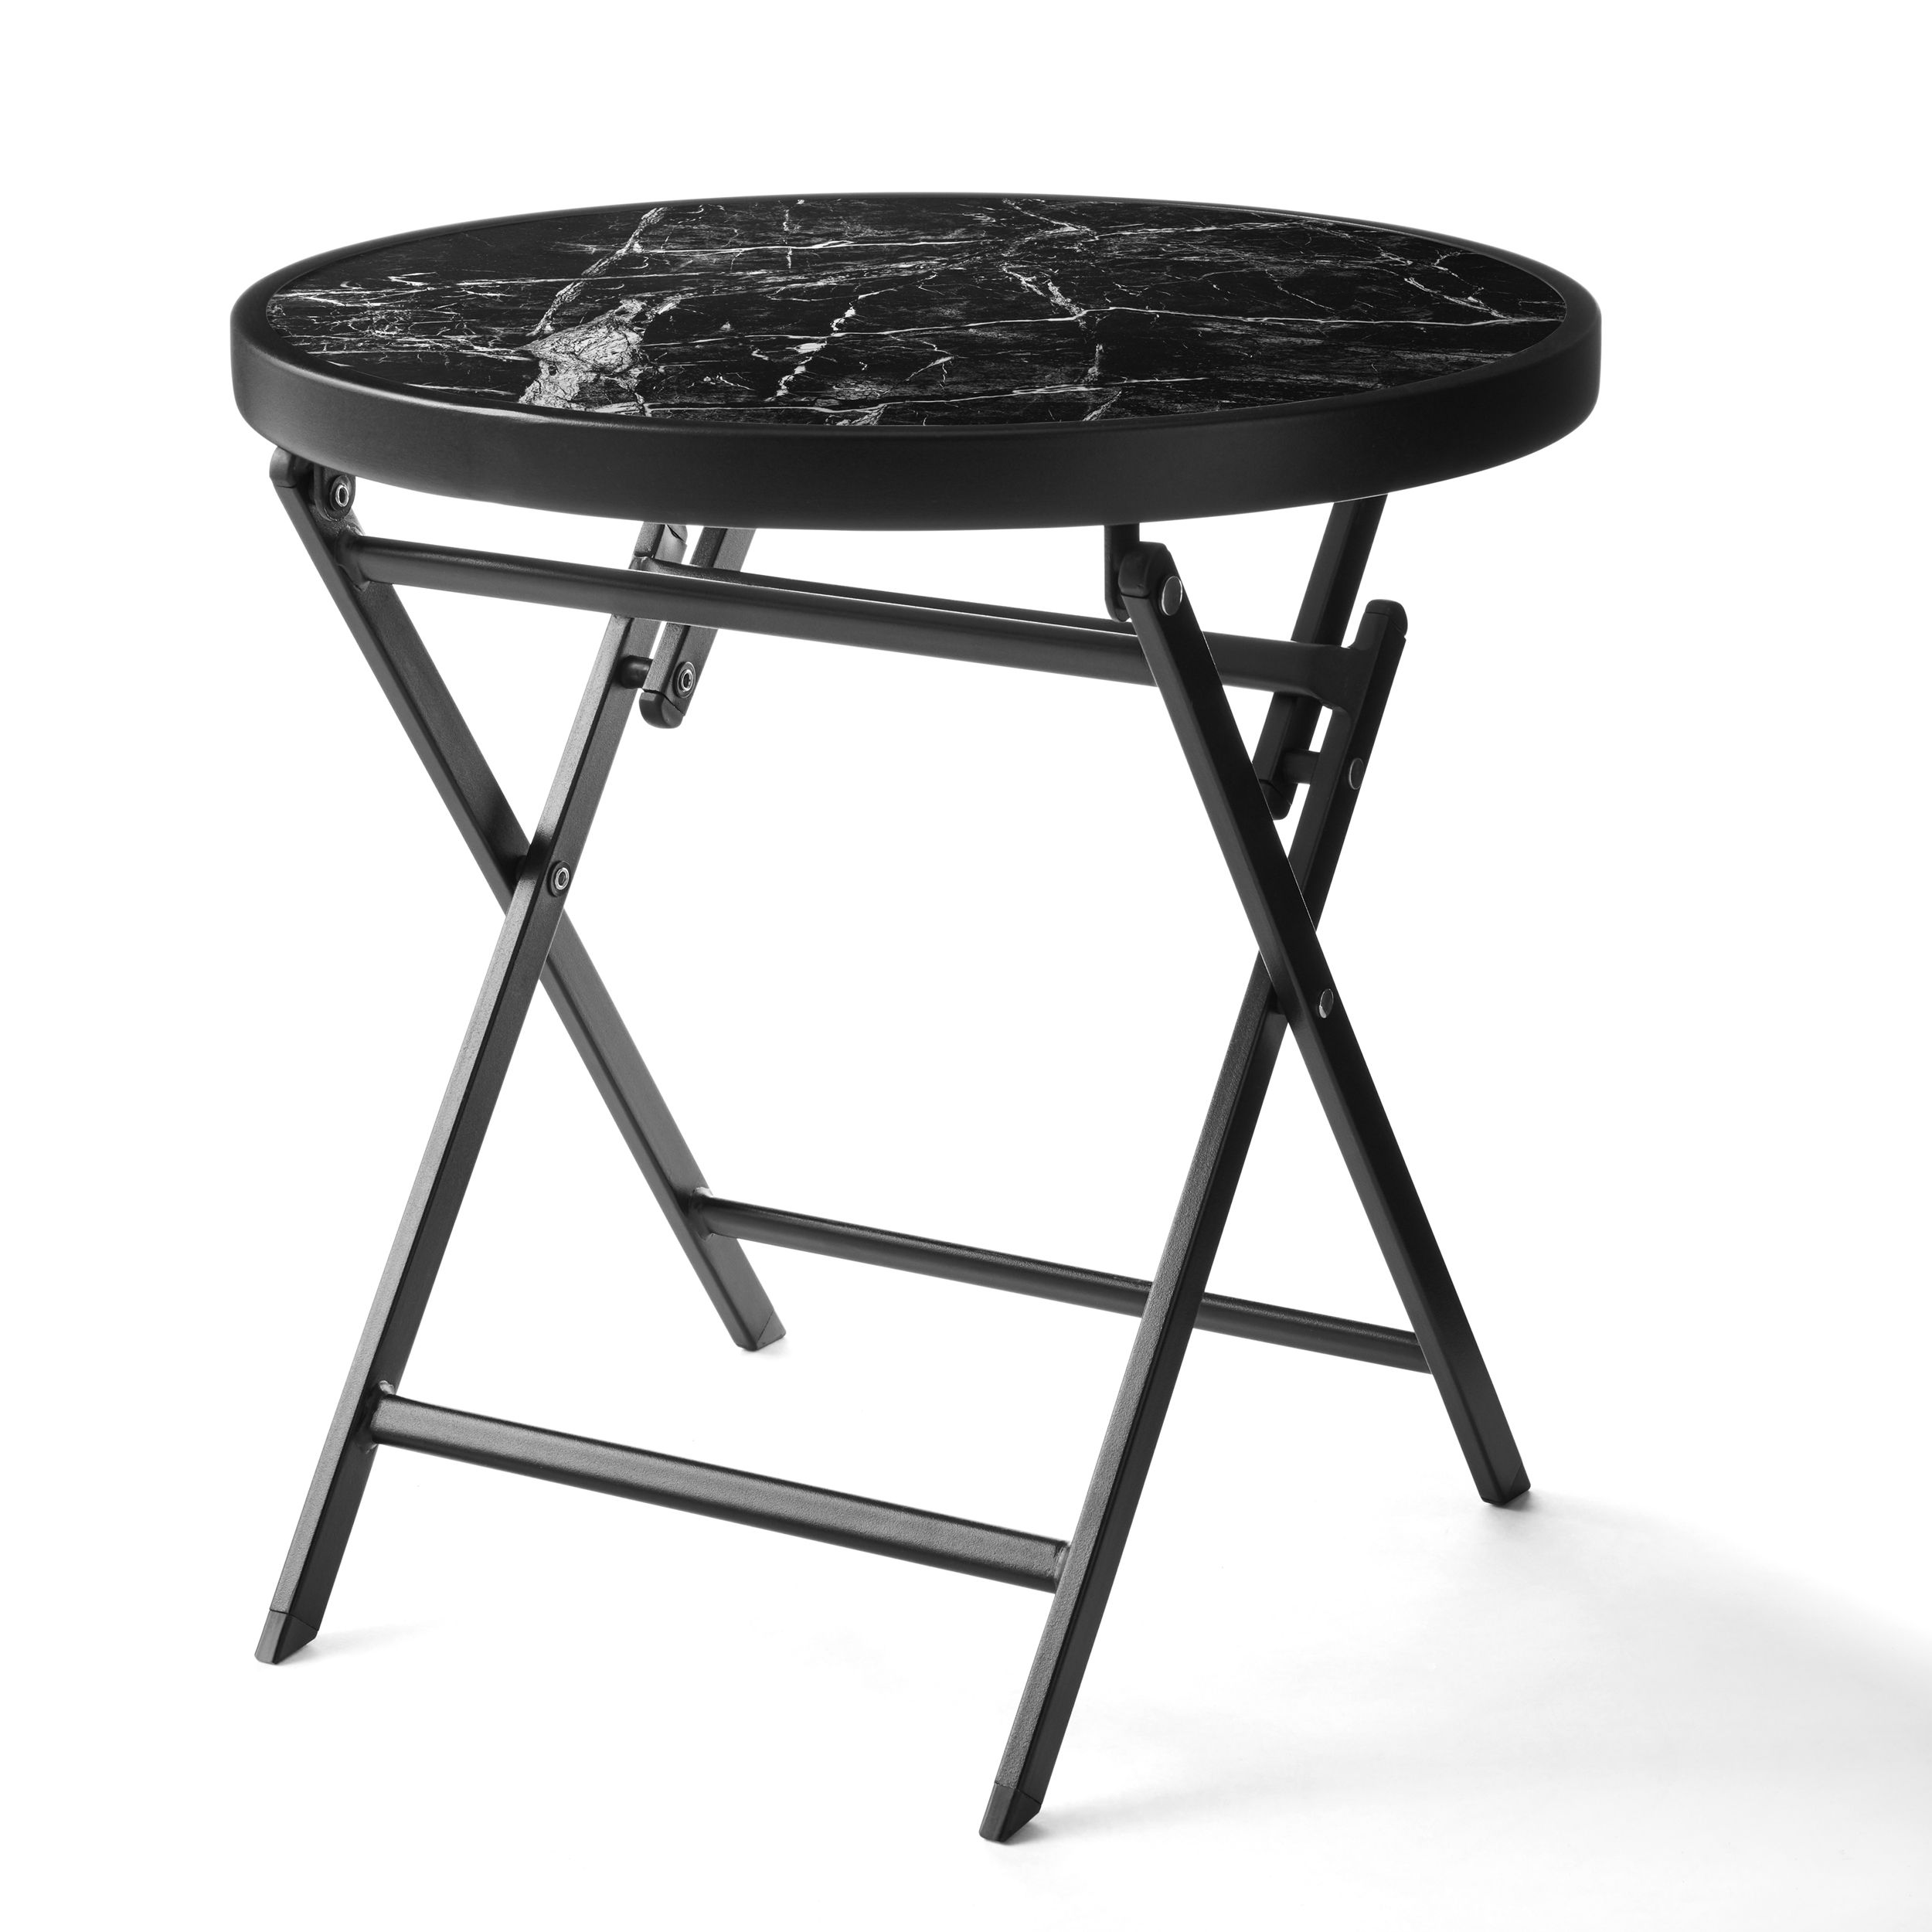 Mainstays 18" Greyson Square Black Marble Steel Round Folding Table - image 1 of 6